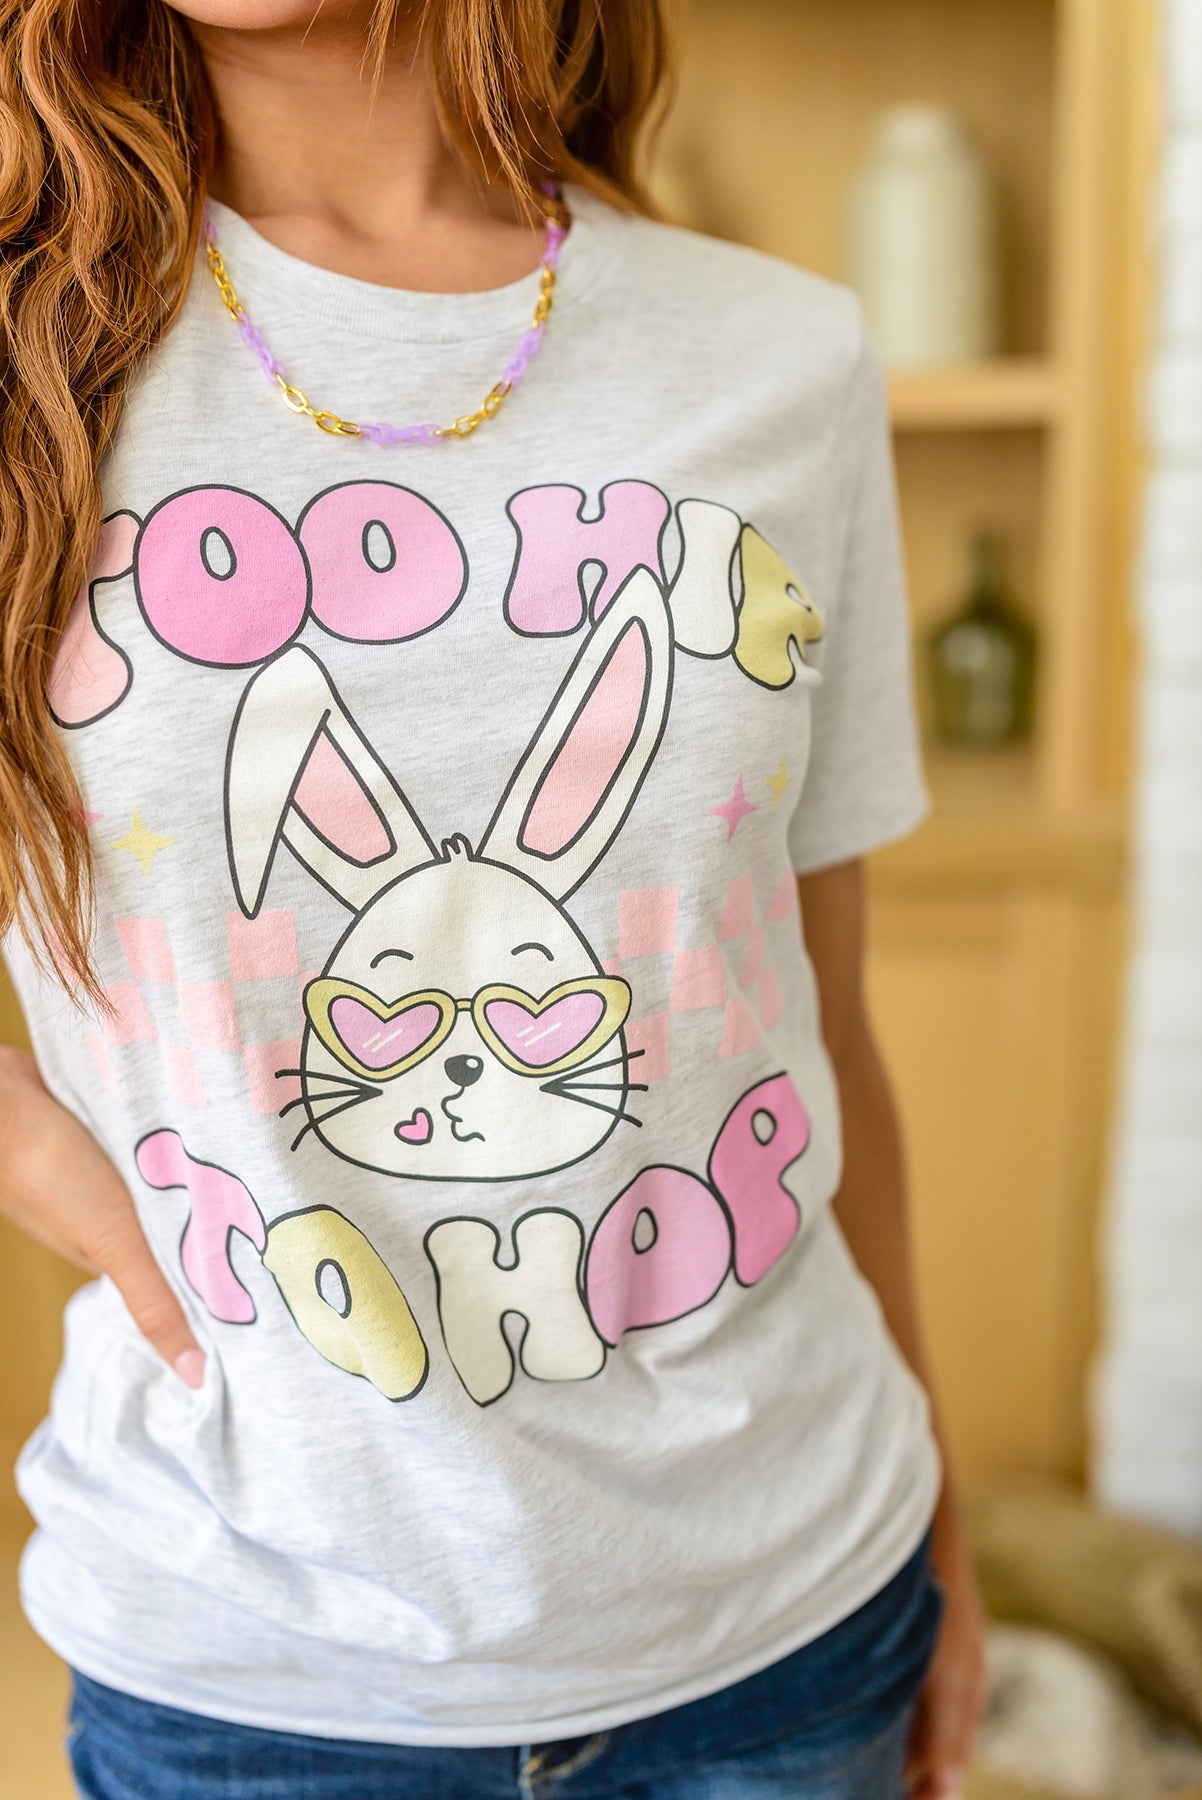 Too Hip To Hop Pastel Bunny Graphic Tee   